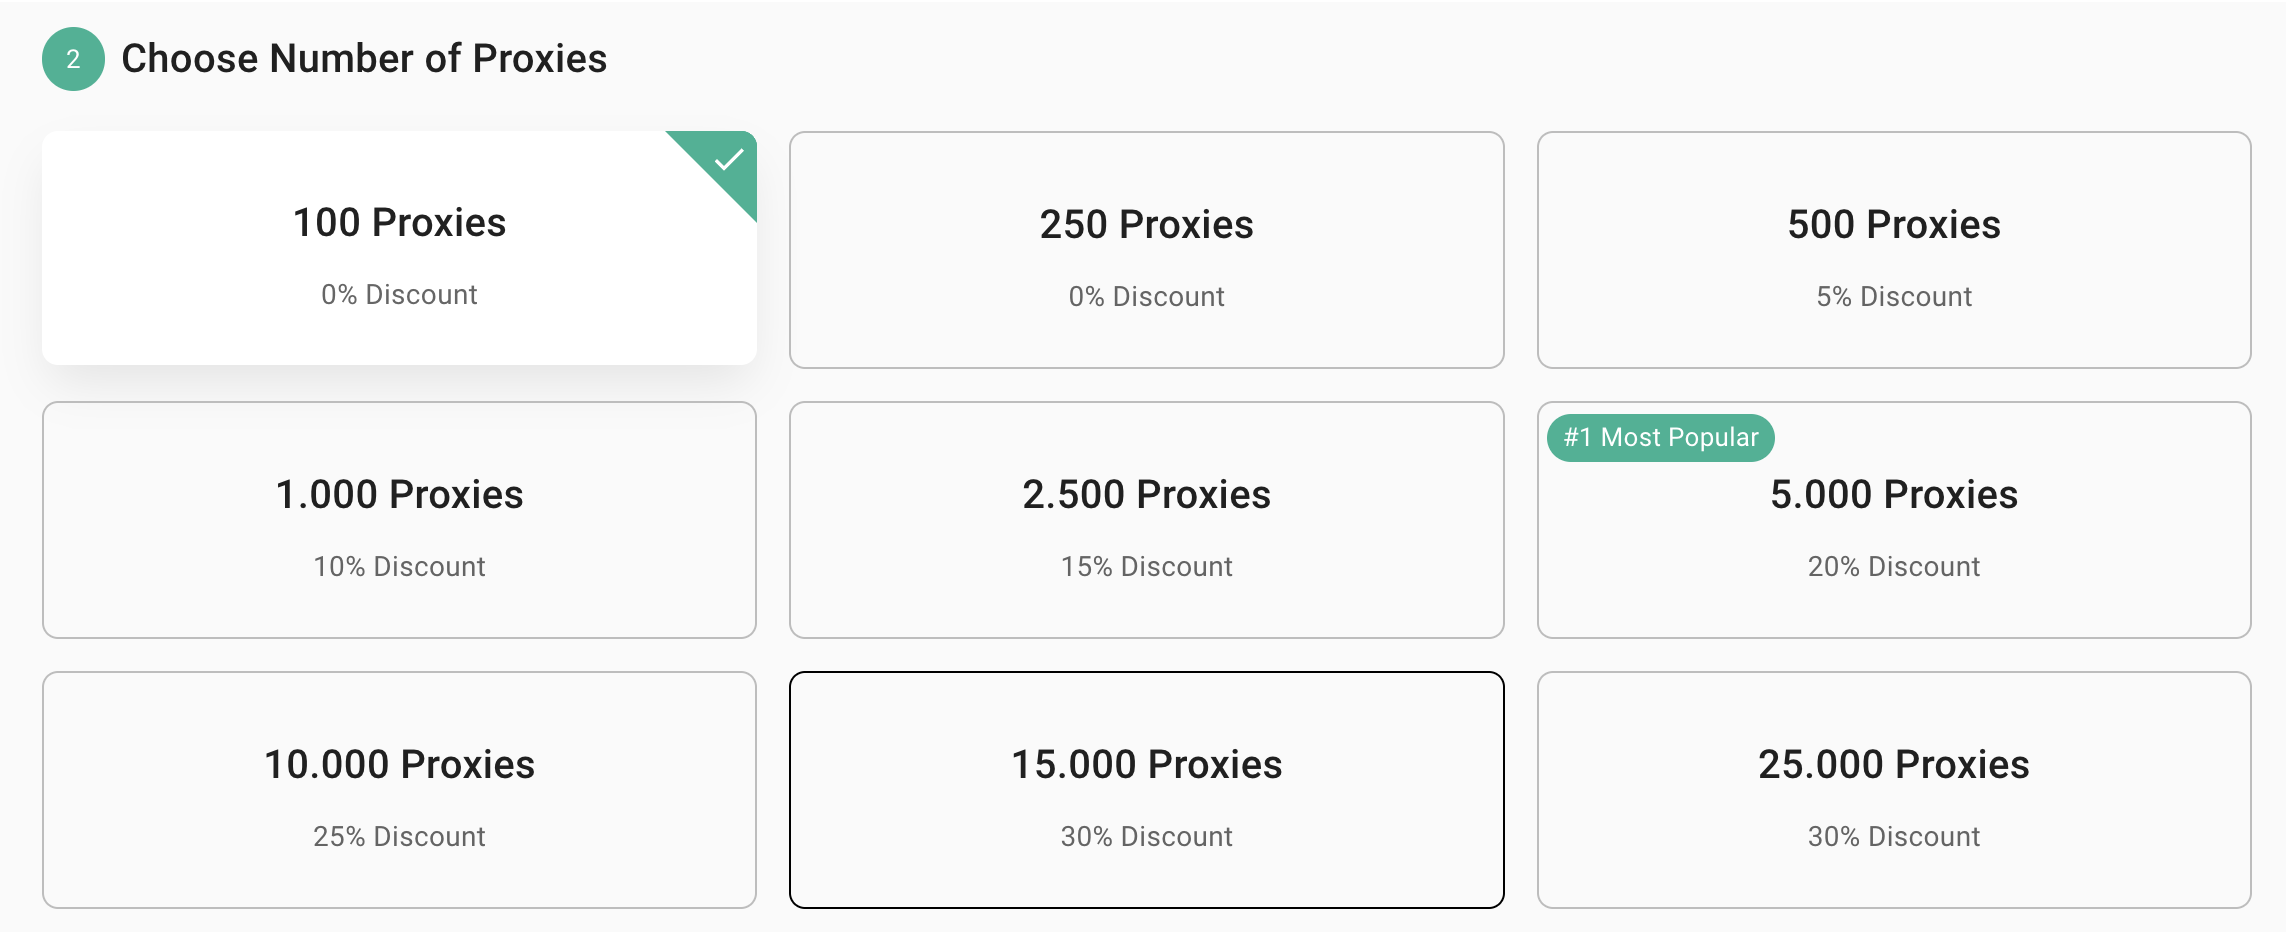 Select the number of proxies you want to buy